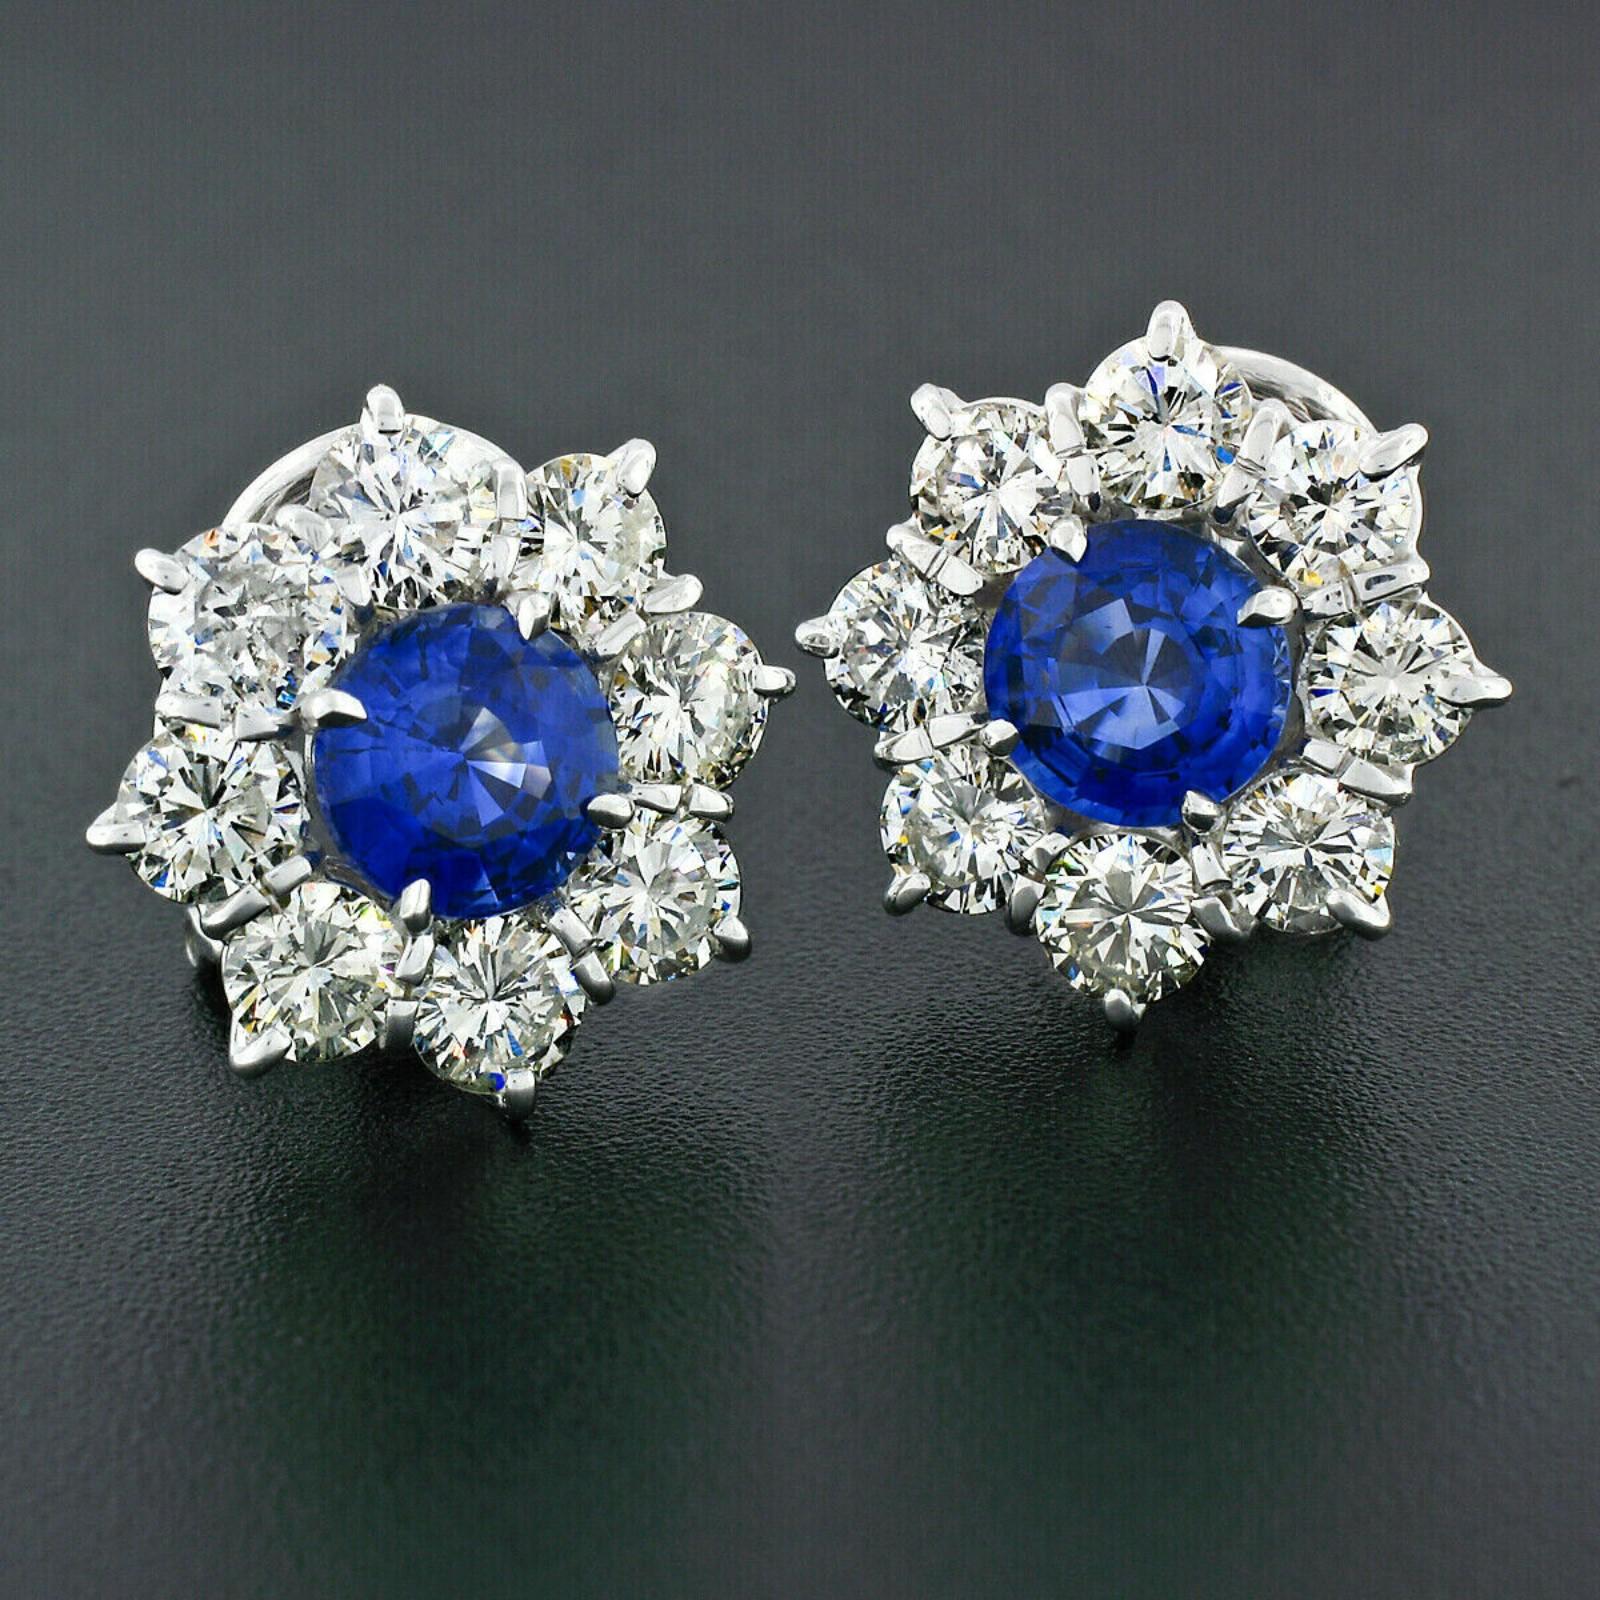 This is an absolutely gorgeous pair of sapphire and diamond cluster flower earrings, very well crafted in solid 18k white gold. Each earring is prong set with a very fine quality, round brilliant cut sapphire at its center. The GIA certified